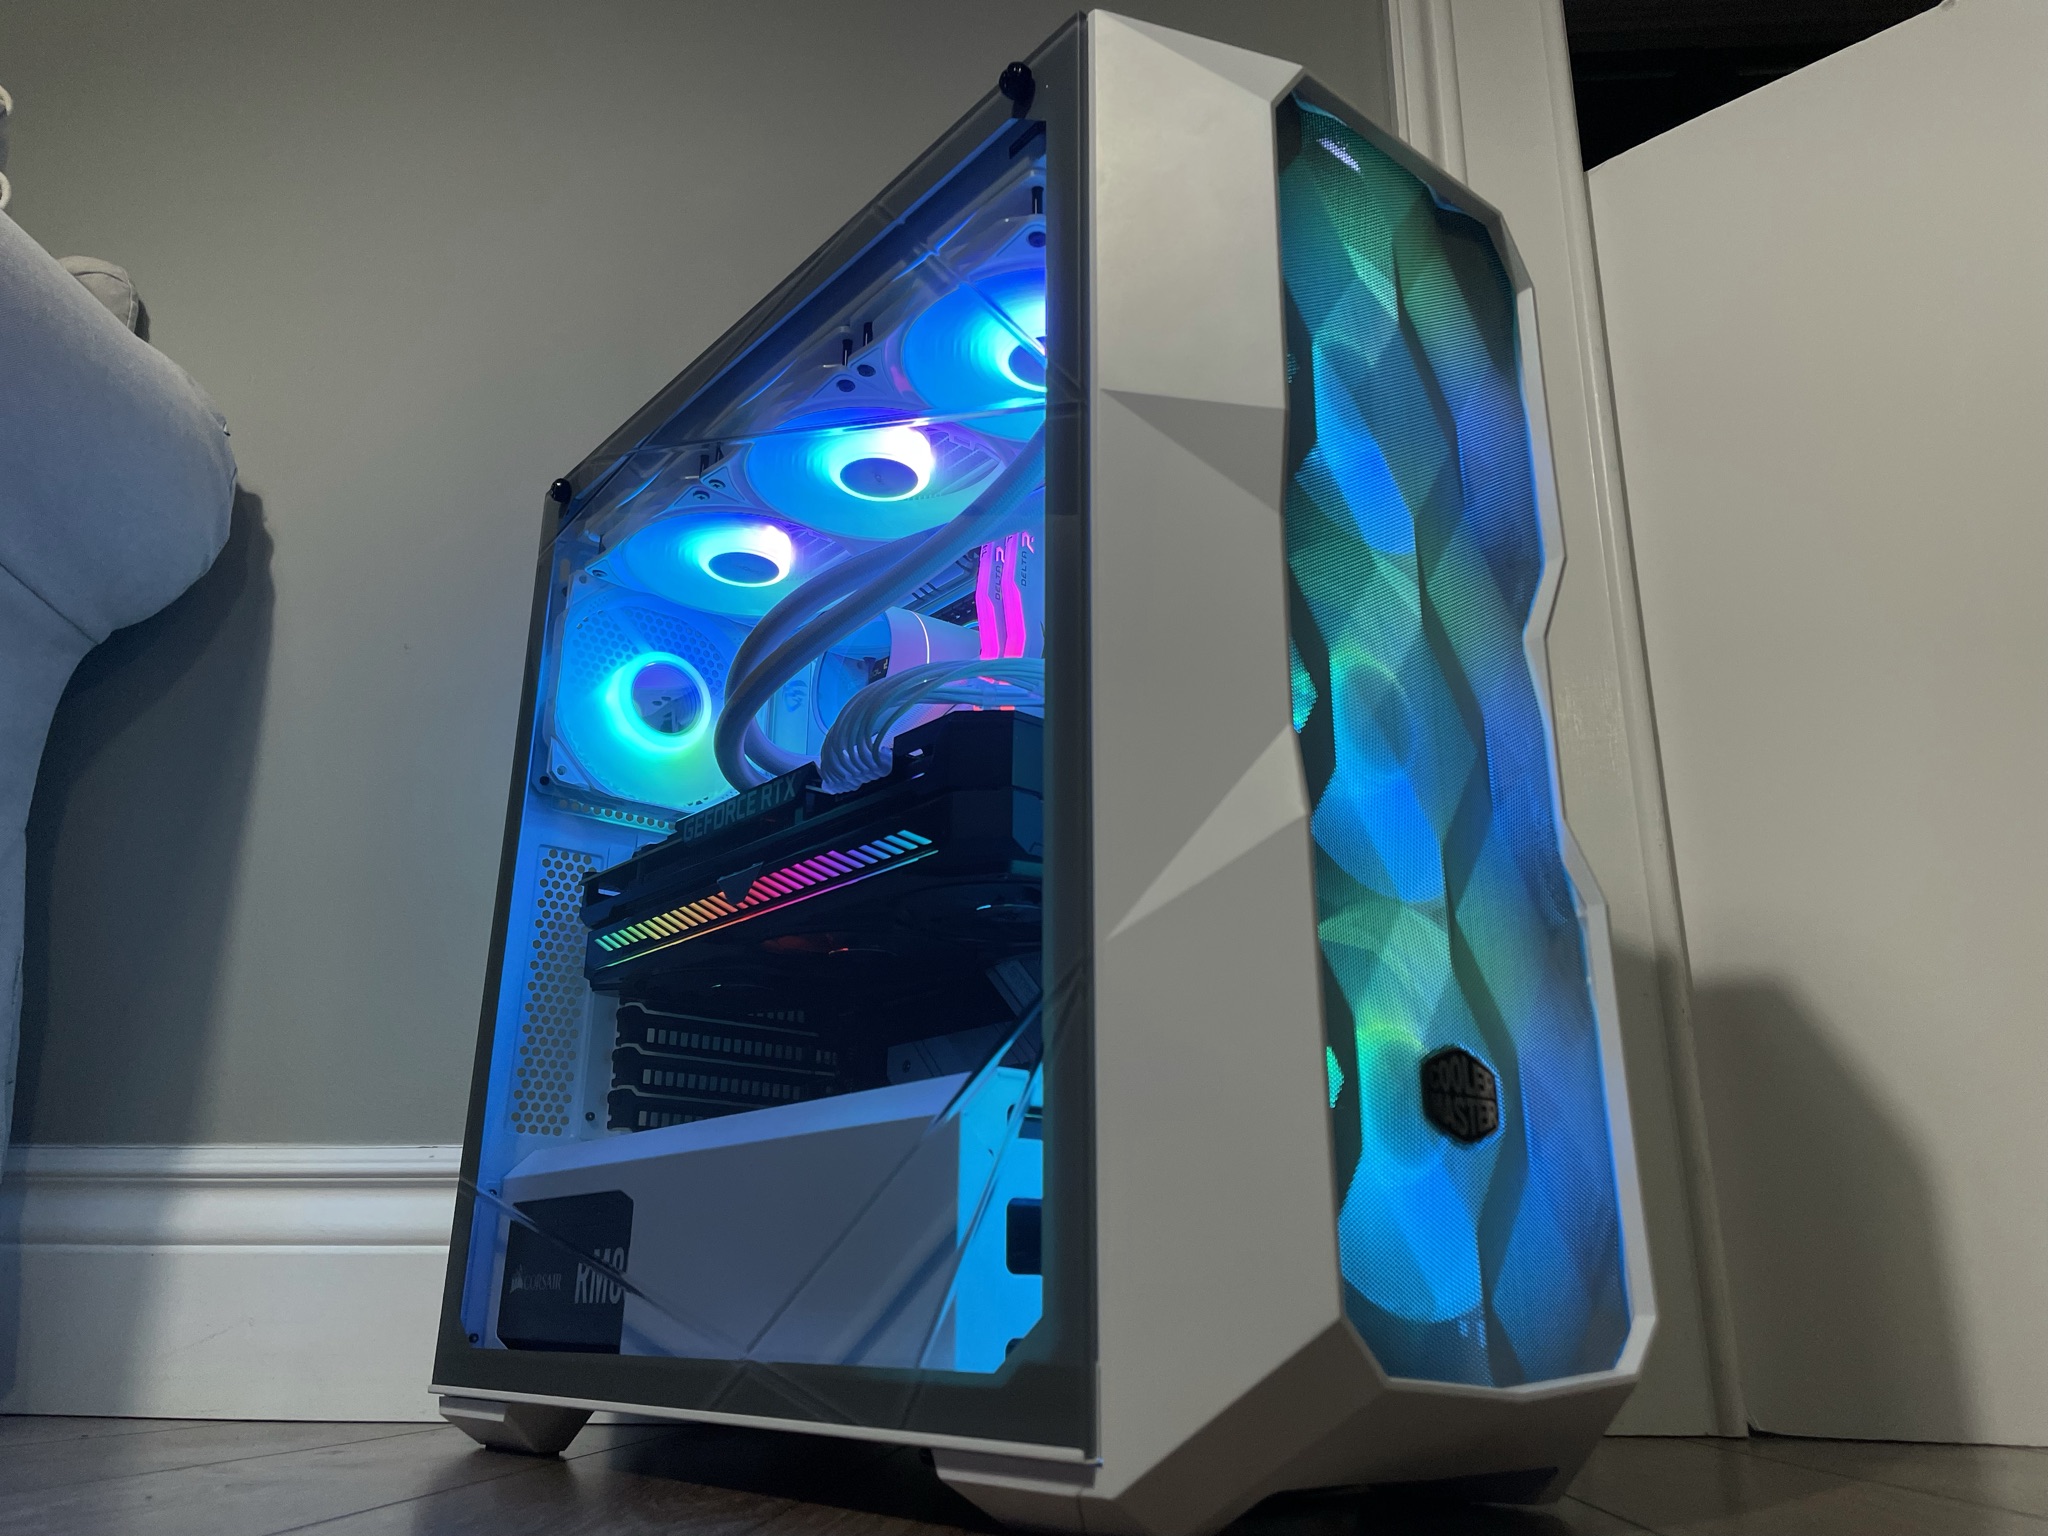 Buy Nova Scotia's Gaming PC With Pro Graphics Cards Great For Twitch Streaming